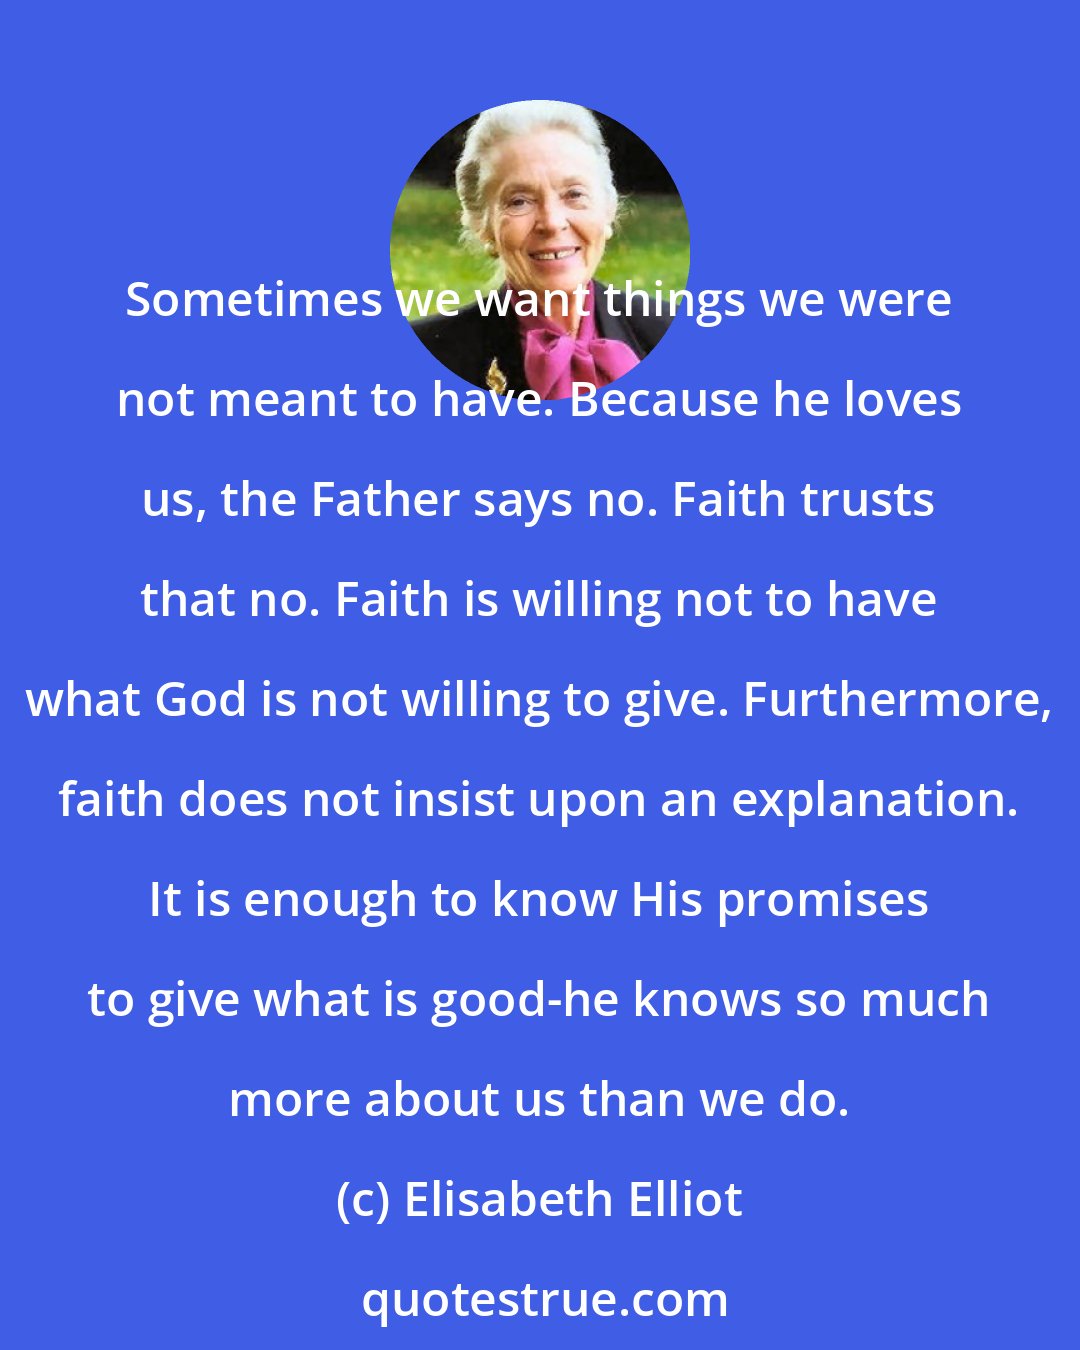 Elisabeth Elliot: Sometimes we want things we were not meant to have. Because he loves us, the Father says no. Faith trusts that no. Faith is willing not to have what God is not willing to give. Furthermore, faith does not insist upon an explanation. It is enough to know His promises to give what is good-he knows so much more about us than we do.